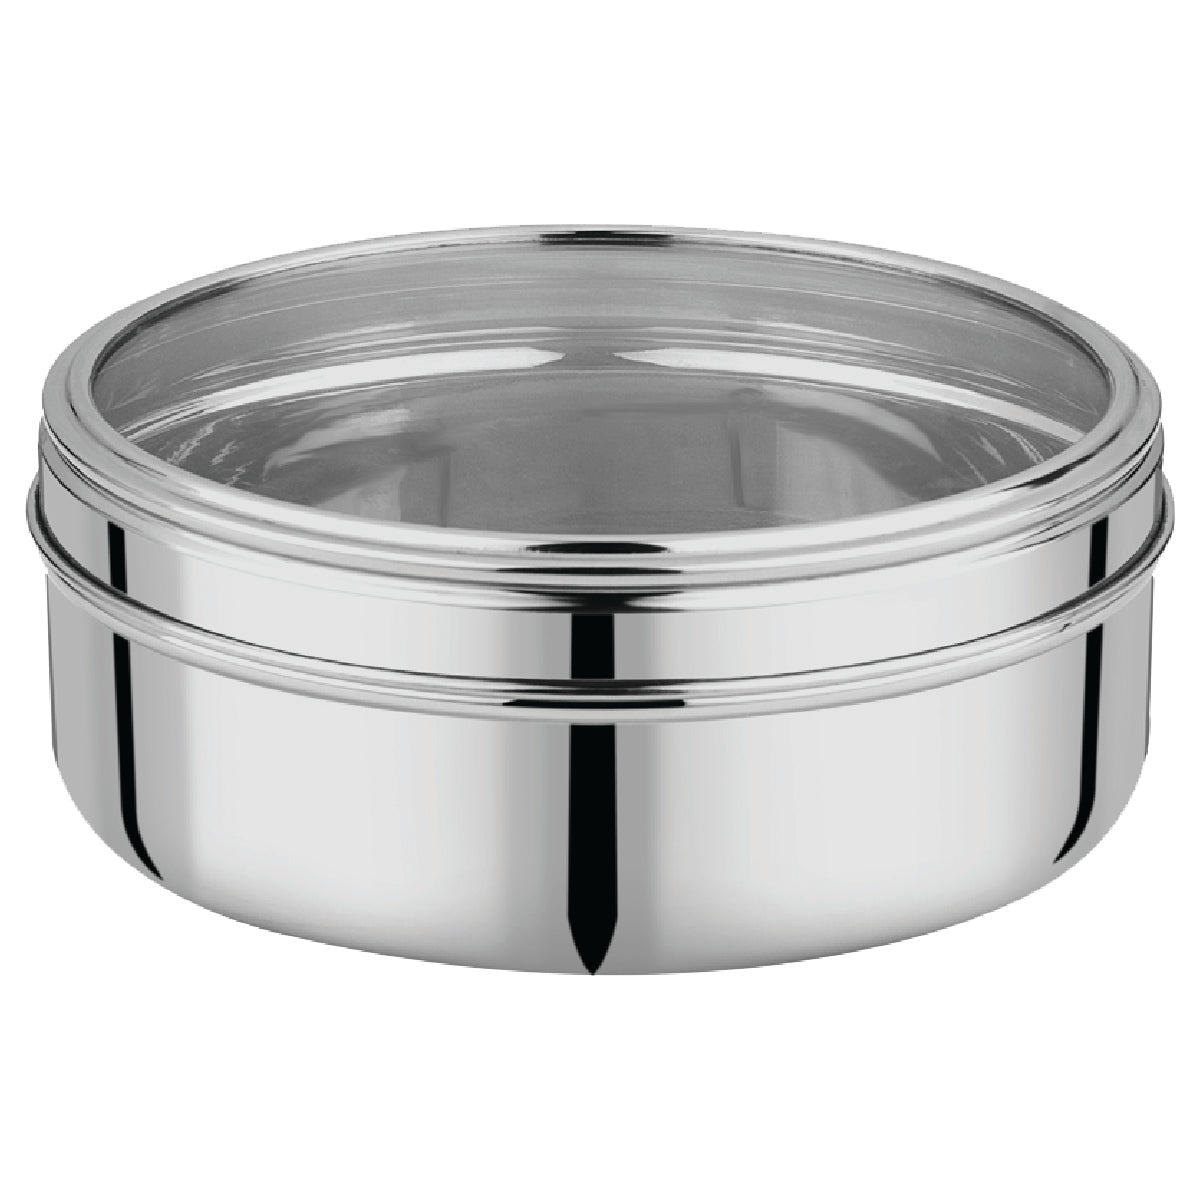 Stainless Steel Container See Through 13 (Puri Dabba) - 22x6.8cm - PD- 3PC ST (PD-13-ST)